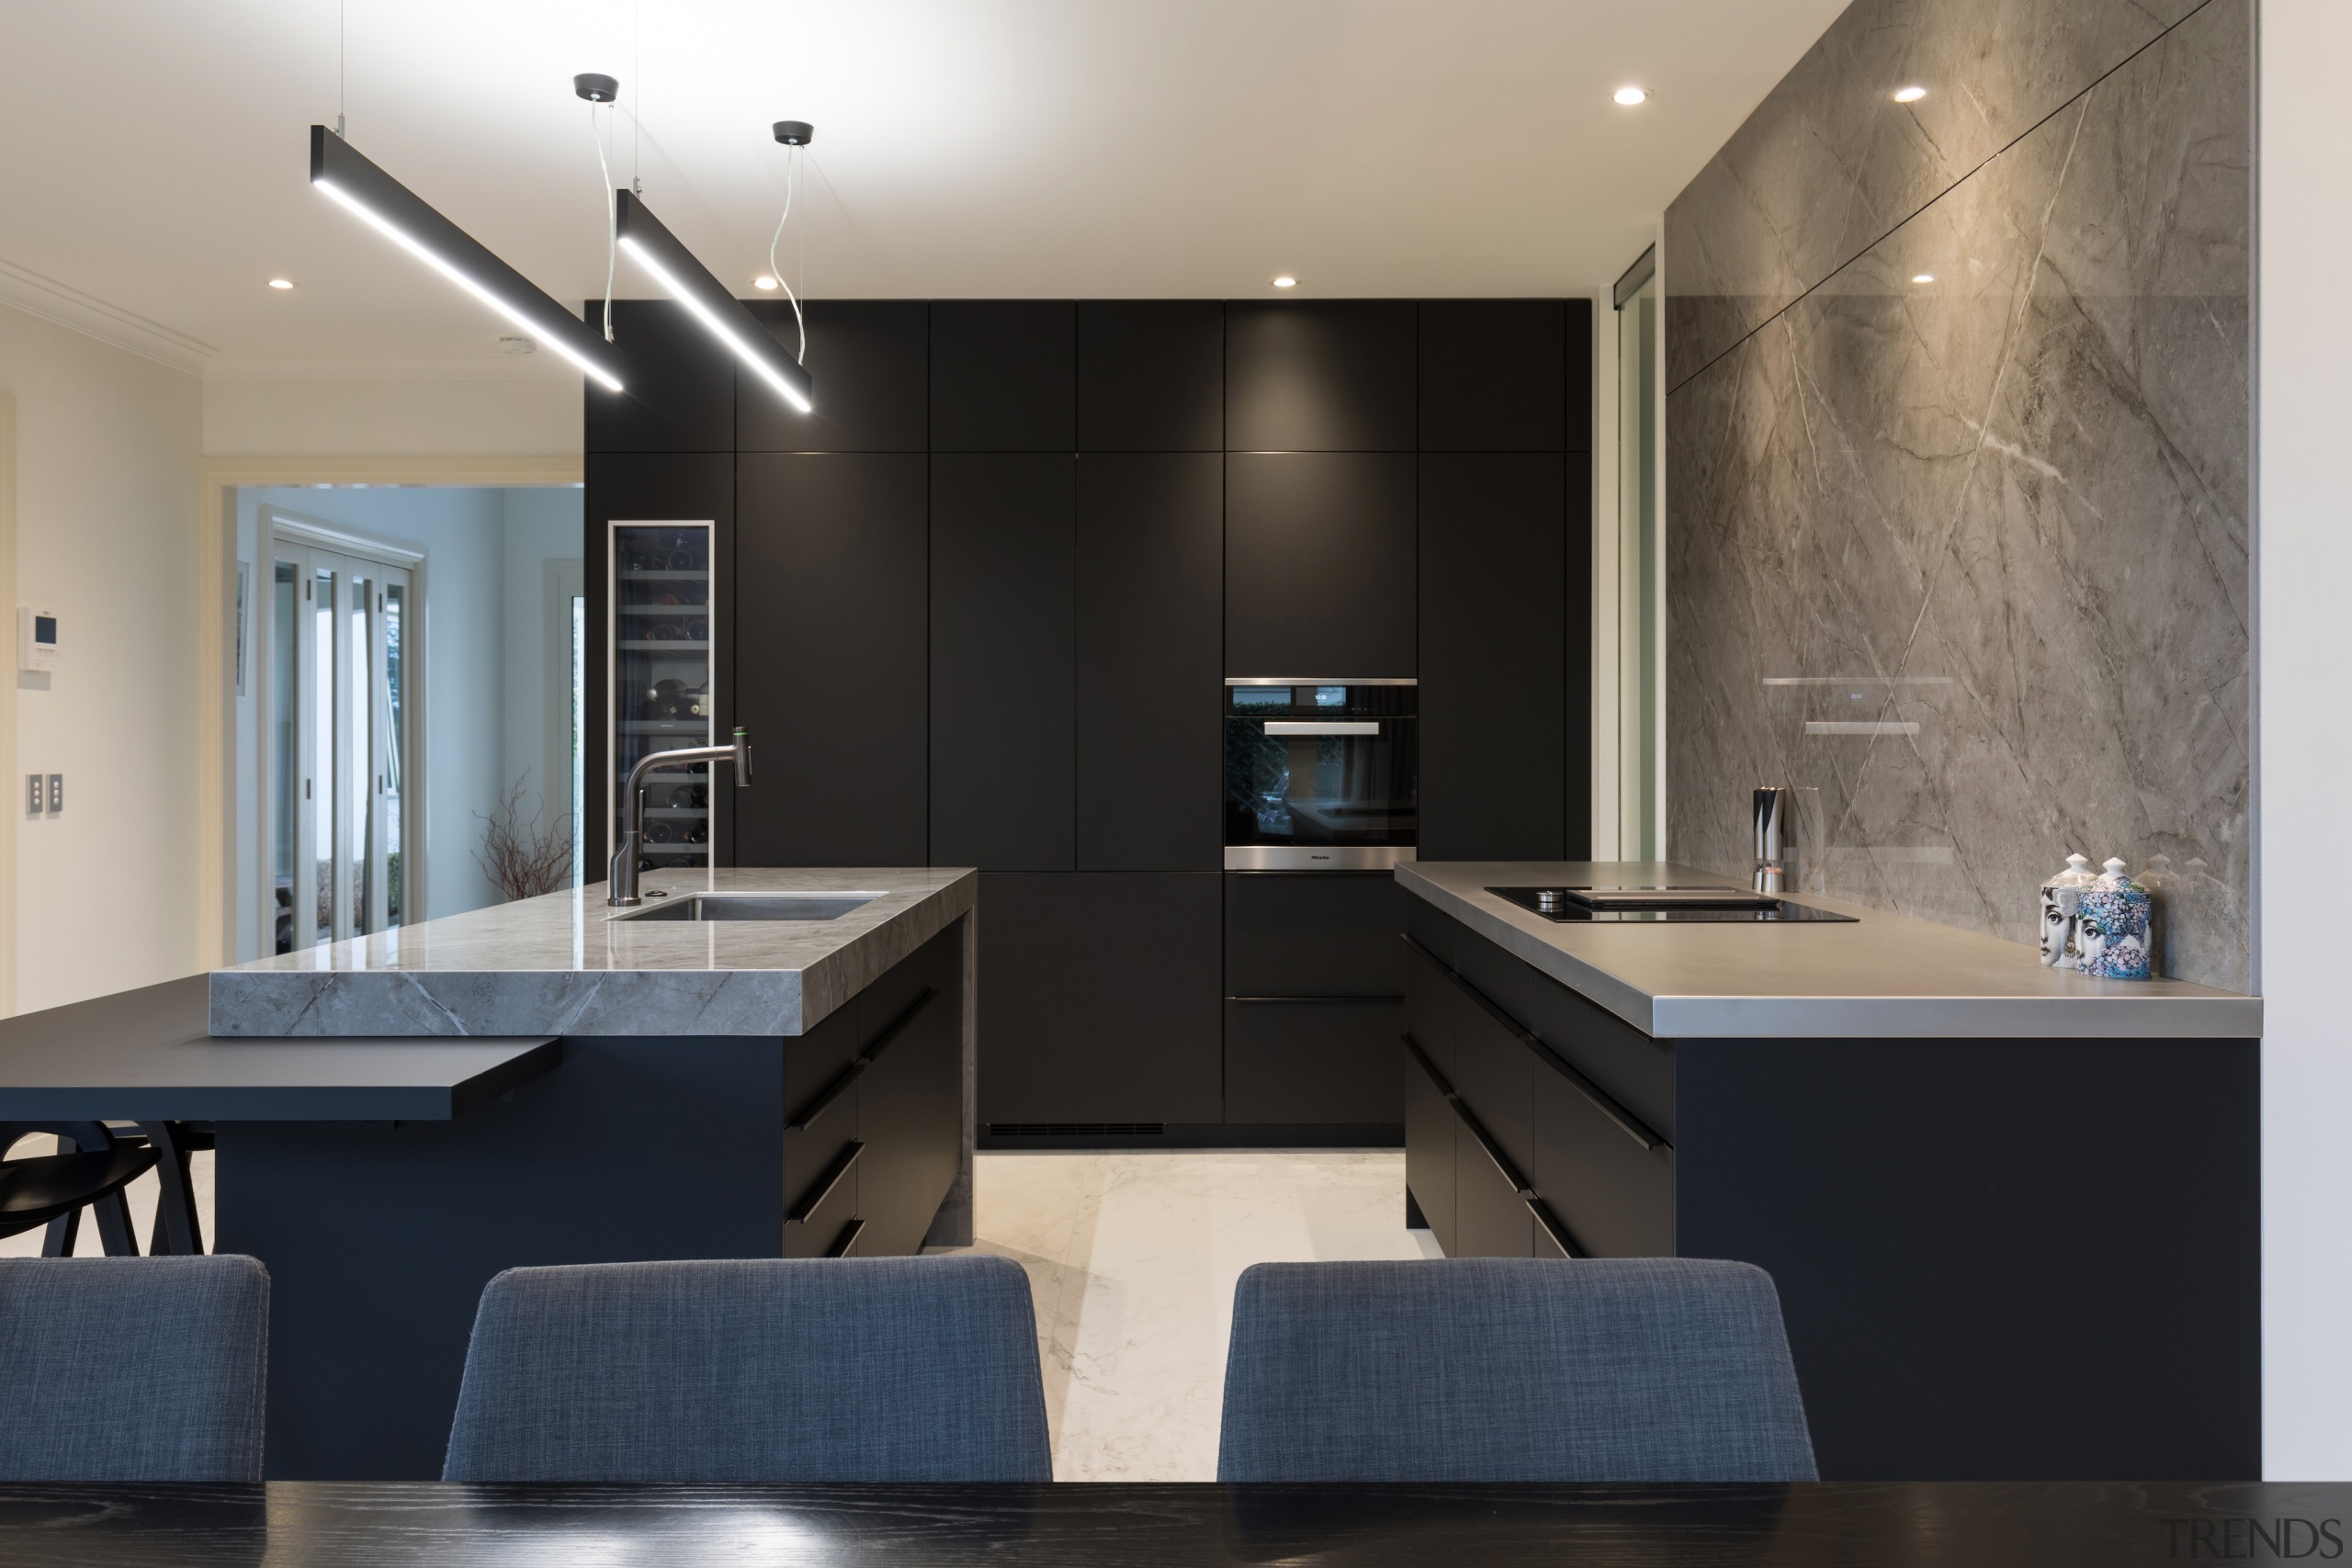 The full-height cabinetry and bar top surfaces are 